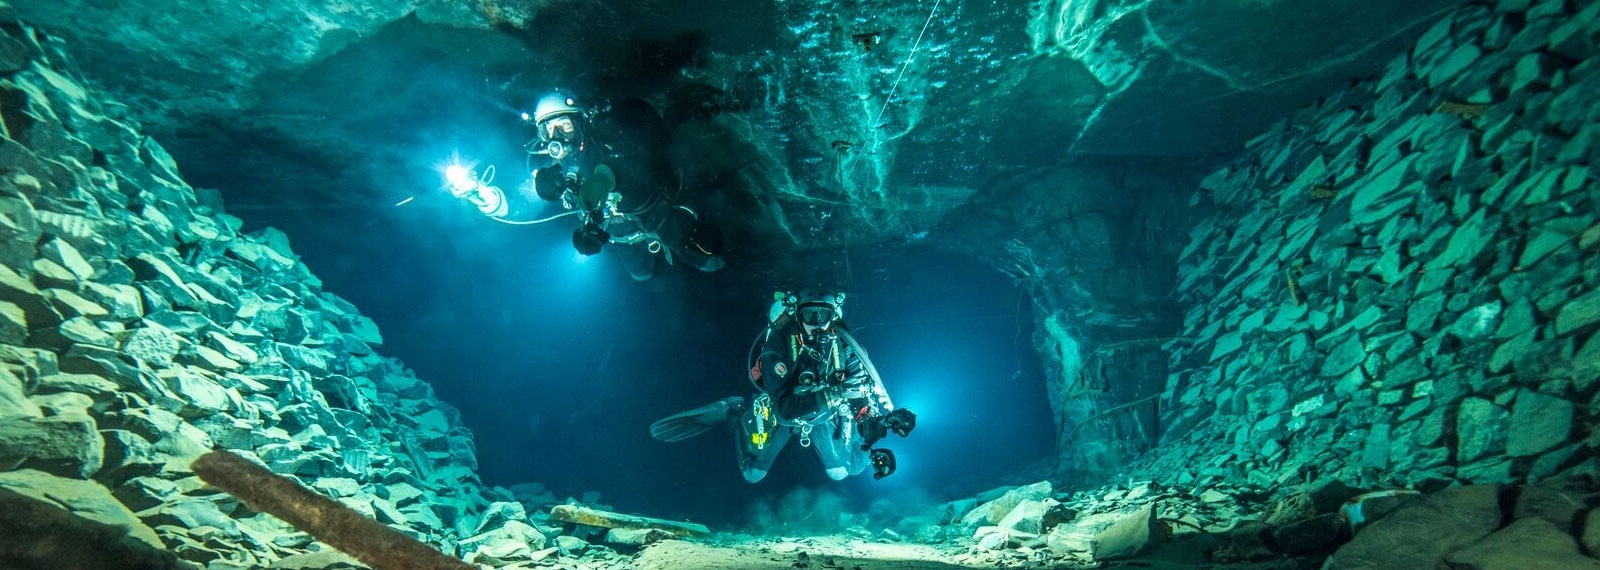 <p style="text-align: center;"><span style="font-size: 18pt;"><strong>IANTD Cave</strong></span></p>
<p style="text-align: center;"><br /><span style="font-size: 18pt;"><strong>Diver Programs</strong></span></p>